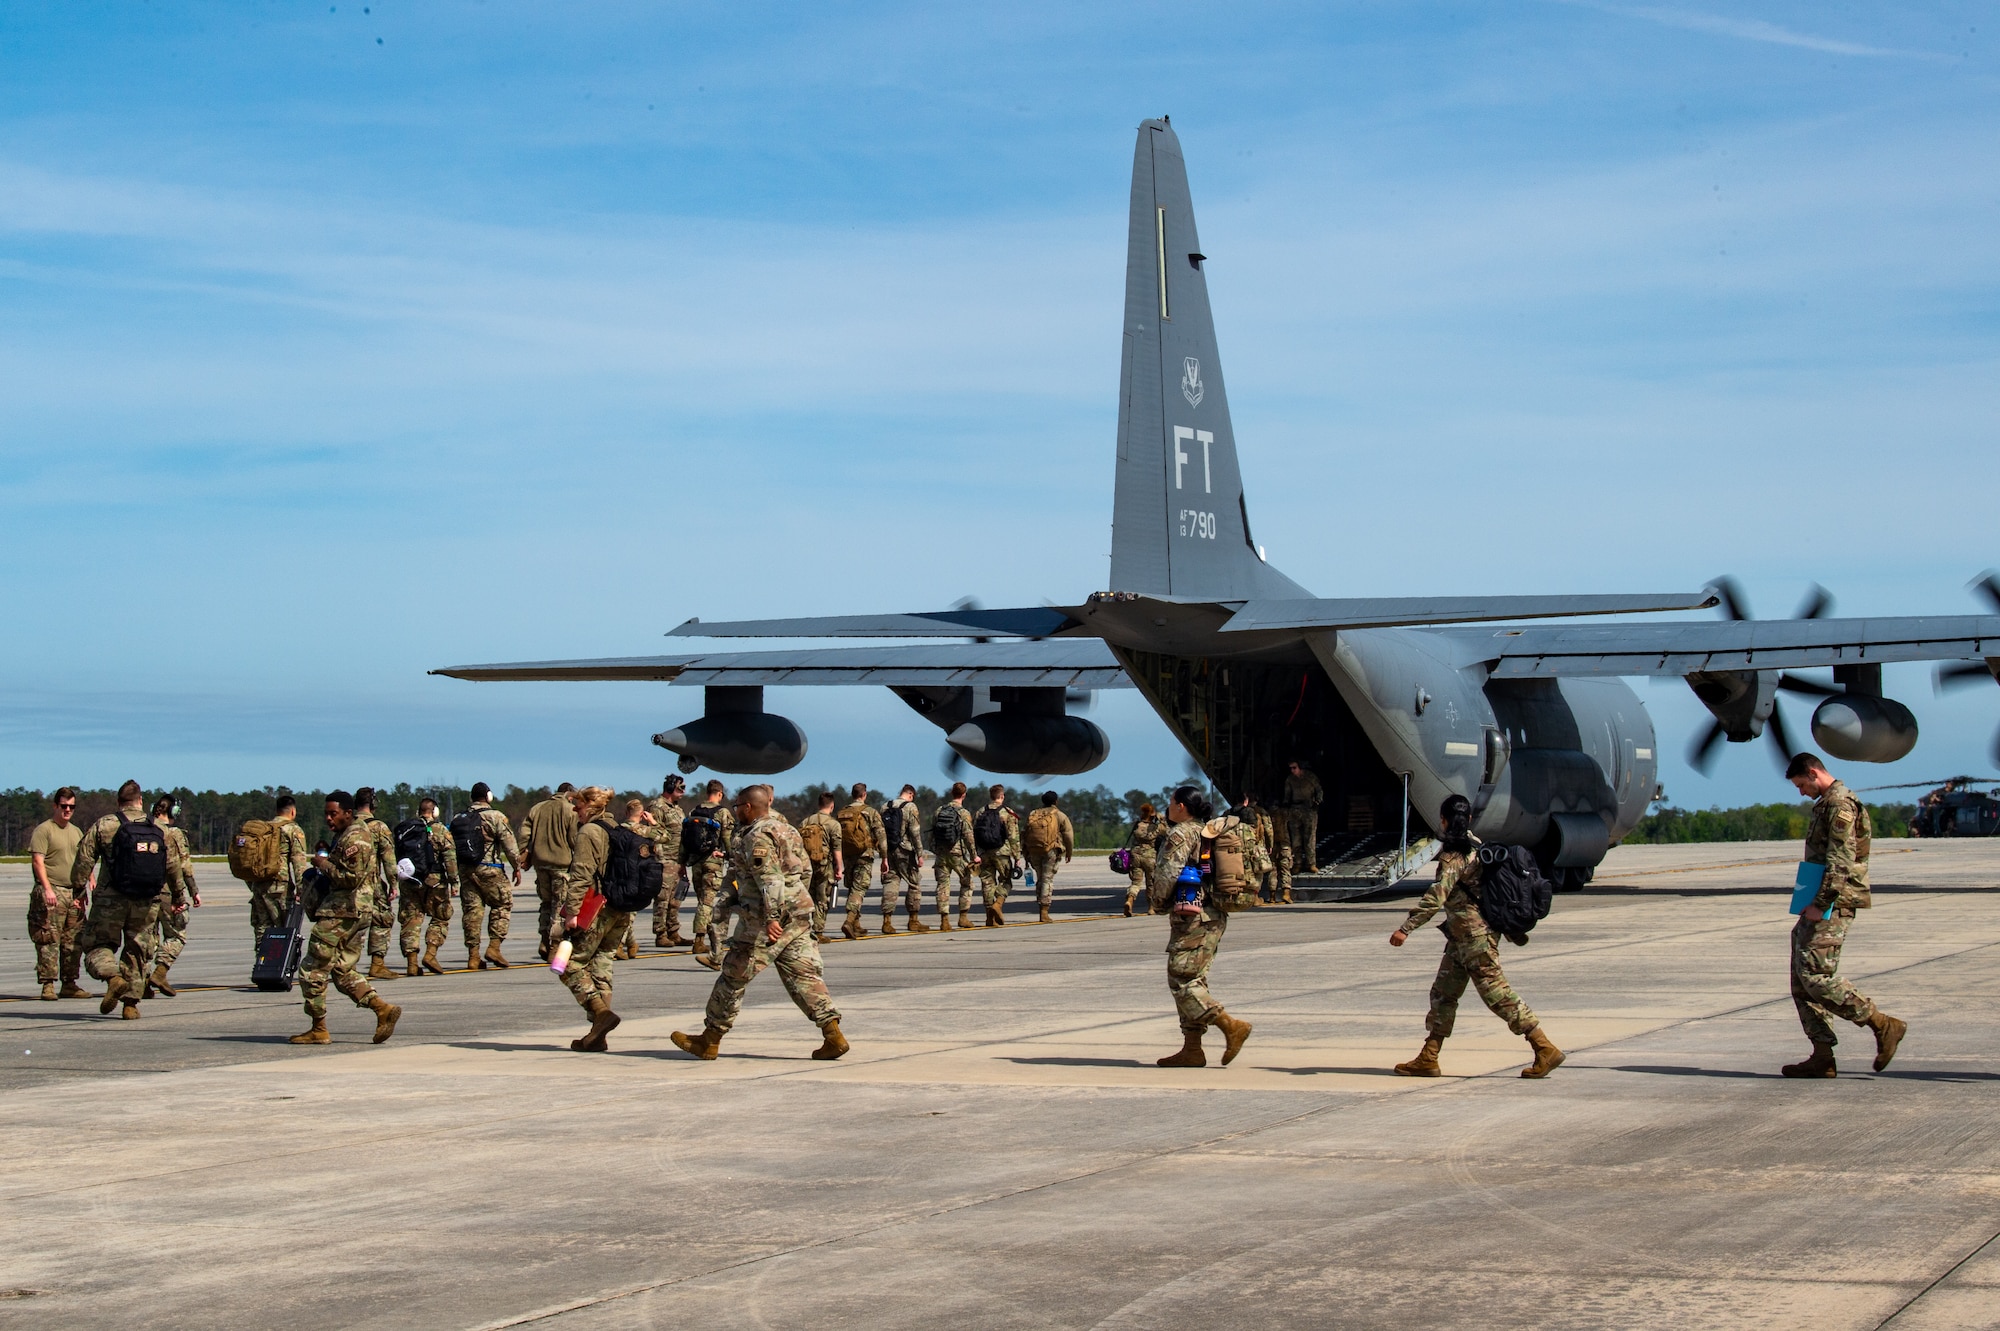 U.S. Air Force Airmen load an HC-130J Combat King II assigned to the 71st Rescue Squadron in support of Exercise Ready Tiger 24-1 at Moody Air Force Base, Georgia, April 8, 2024.  The 71st Rescue Squadron played a vital role in the exercise as they transported personnel and equipment to the various exercise locations.  During Ready Tiger 24-1, exercise inspectors will assess the 23rd Wing's proficiency in employing decentralized command and control to fulfill air tasking orders across geographically dispersed areas amid communication challenges, integrating Agile Combat Employment principles such as integrated combat turns, forward aerial refueling points, multi-capable Airmen, and combat search and rescue capabilities. (U.S. Air Force photo by Airman 1st Class Iain Stanley)